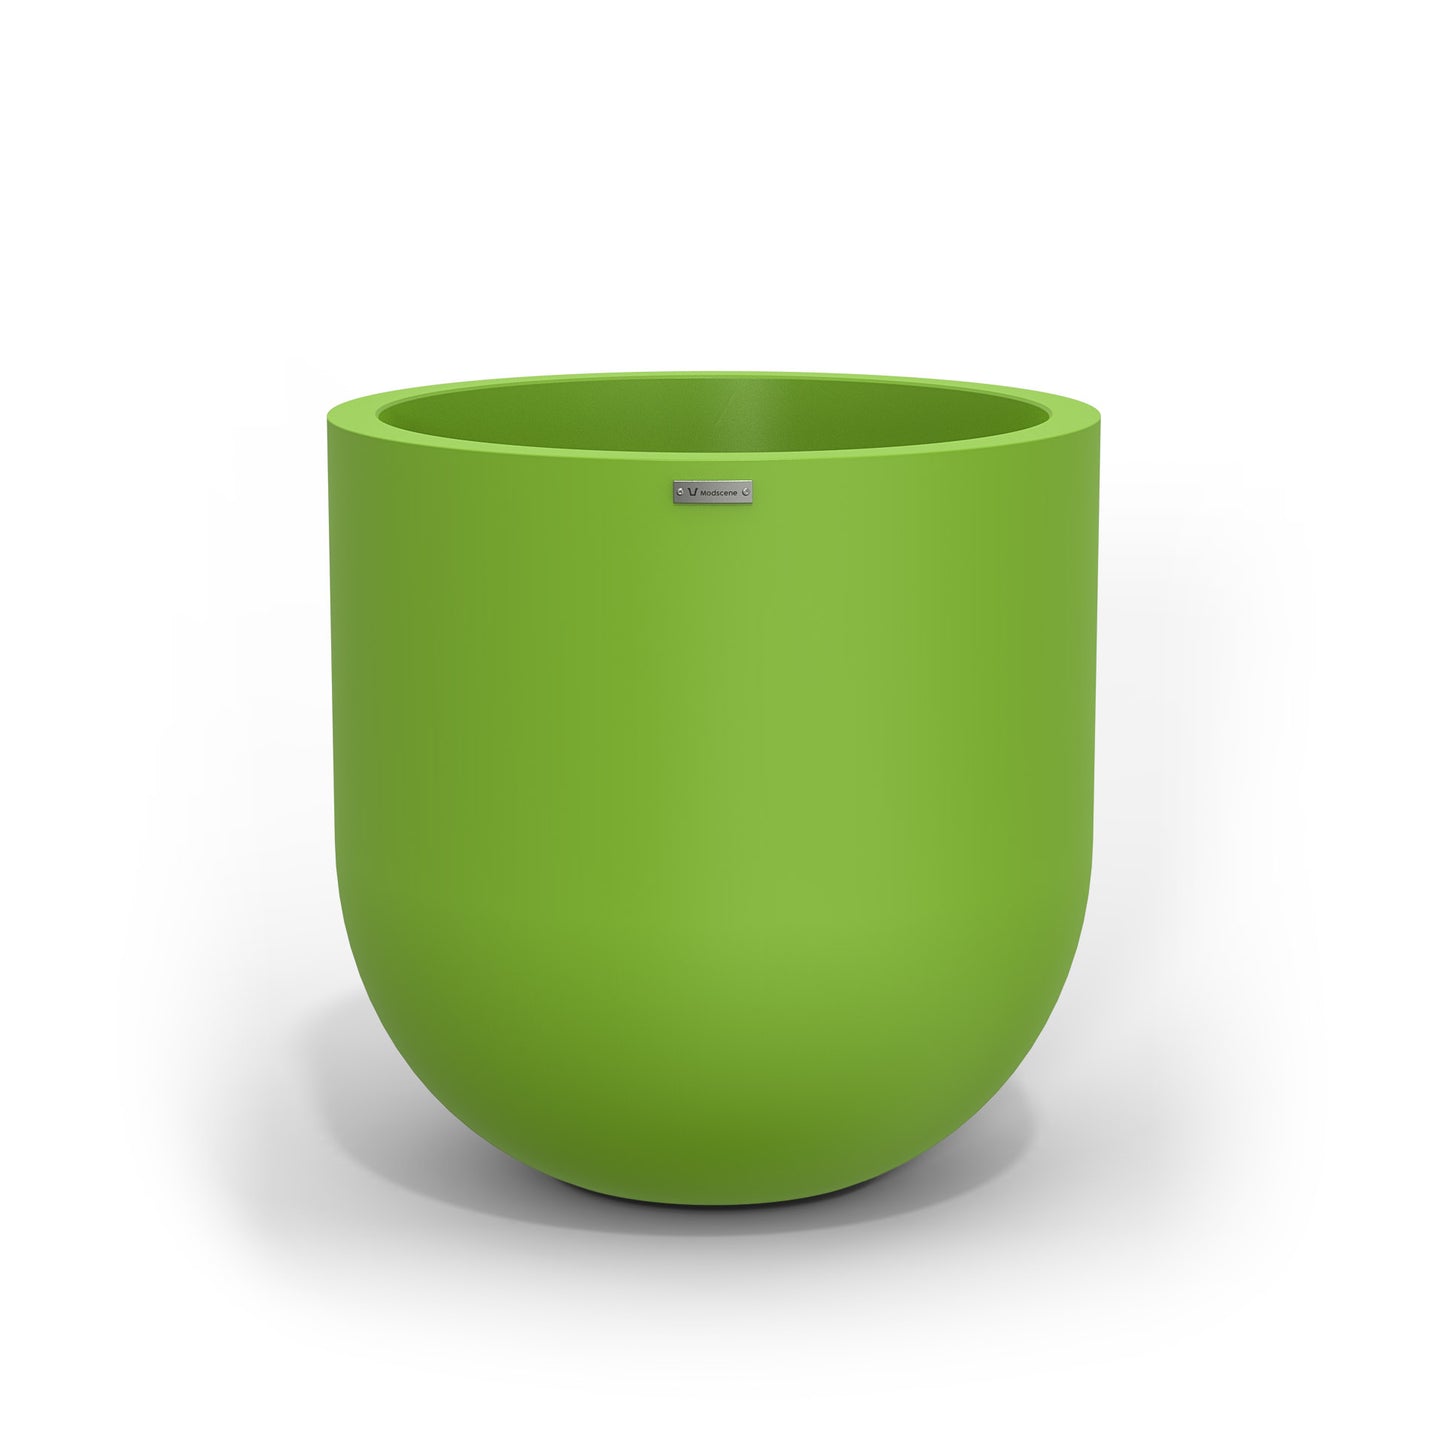 Large Modscene planter pot in a green colour. NZ made